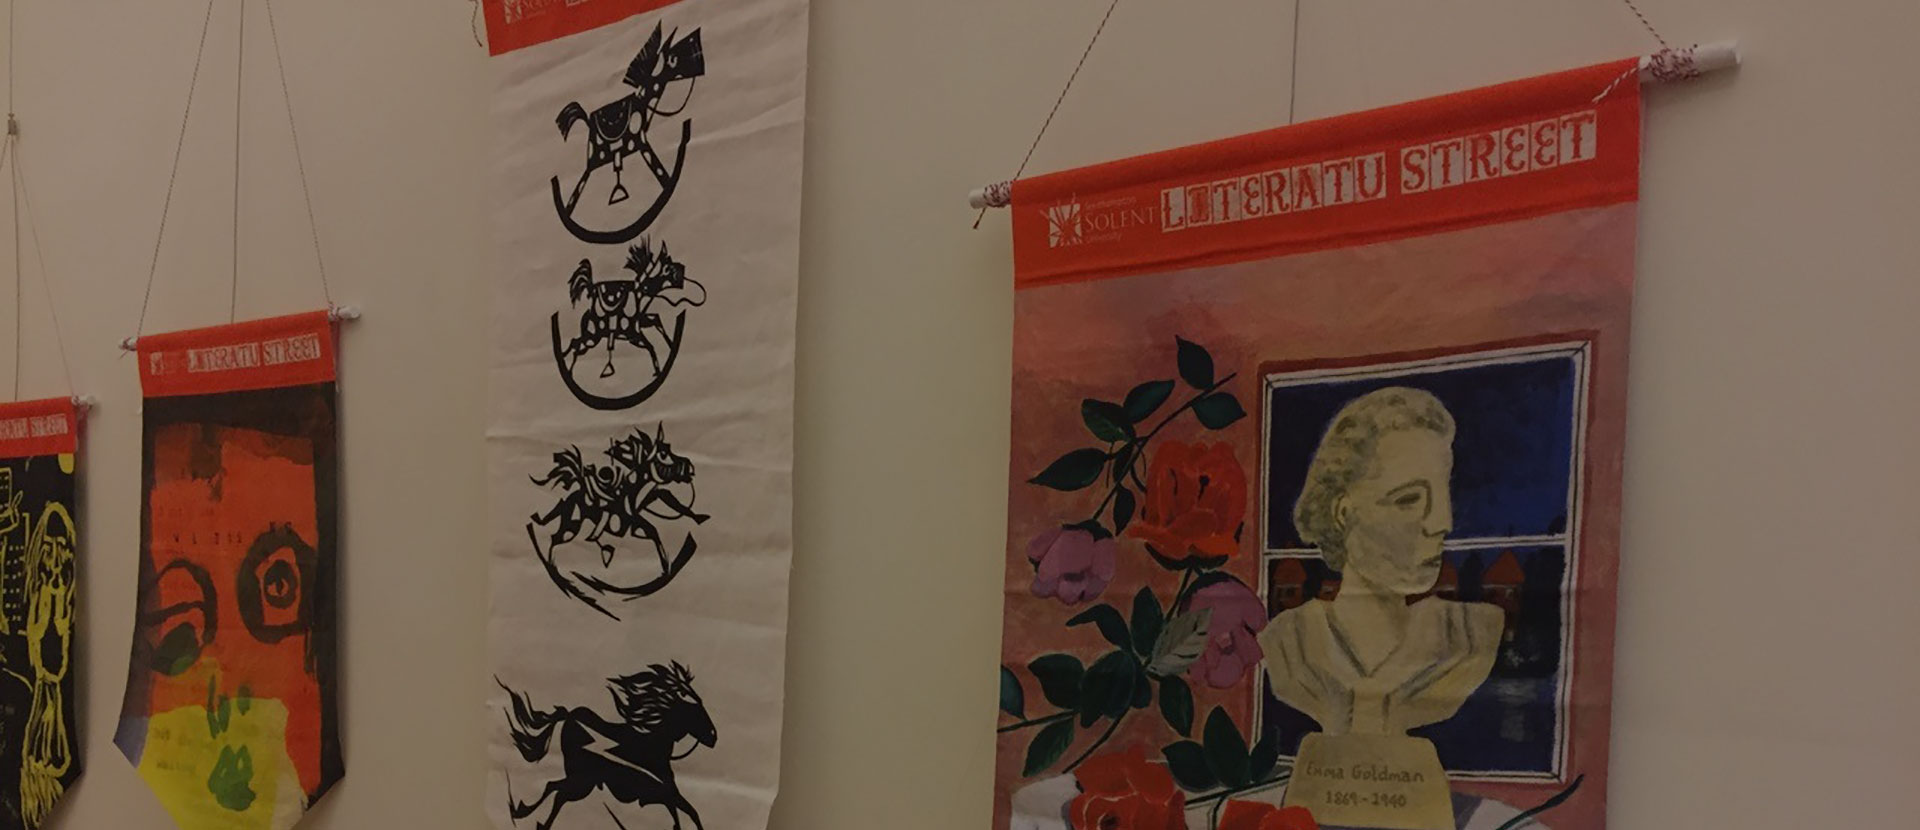 Some of the students' work on display at Vilnius University